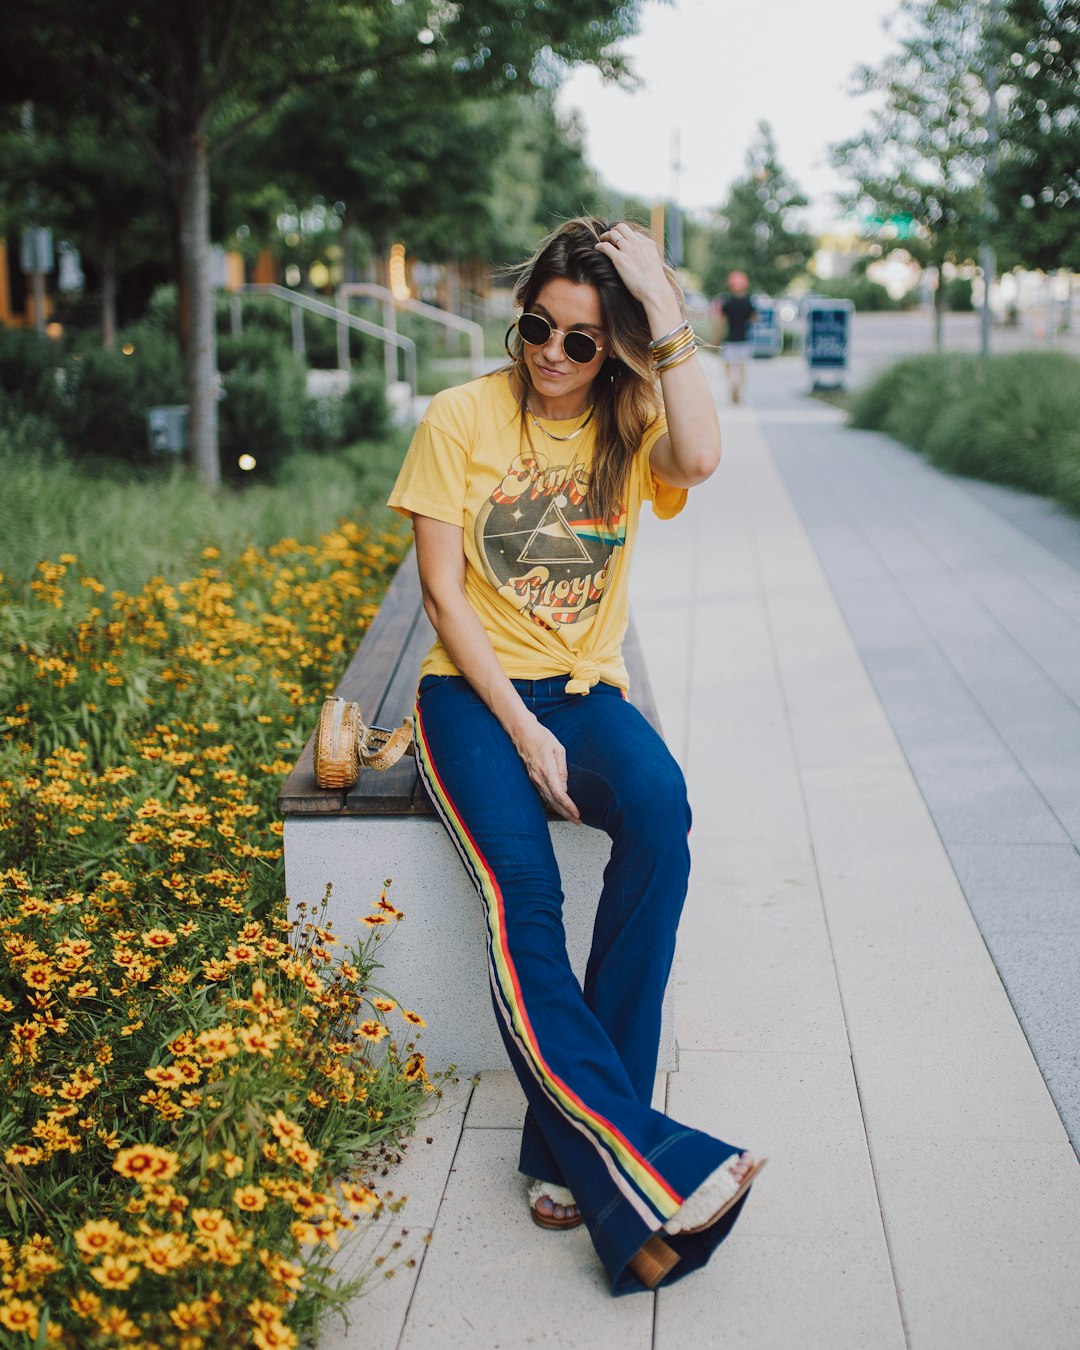 woman in yellow t-shirt and blue pants sitting on concrete pathway during daytime